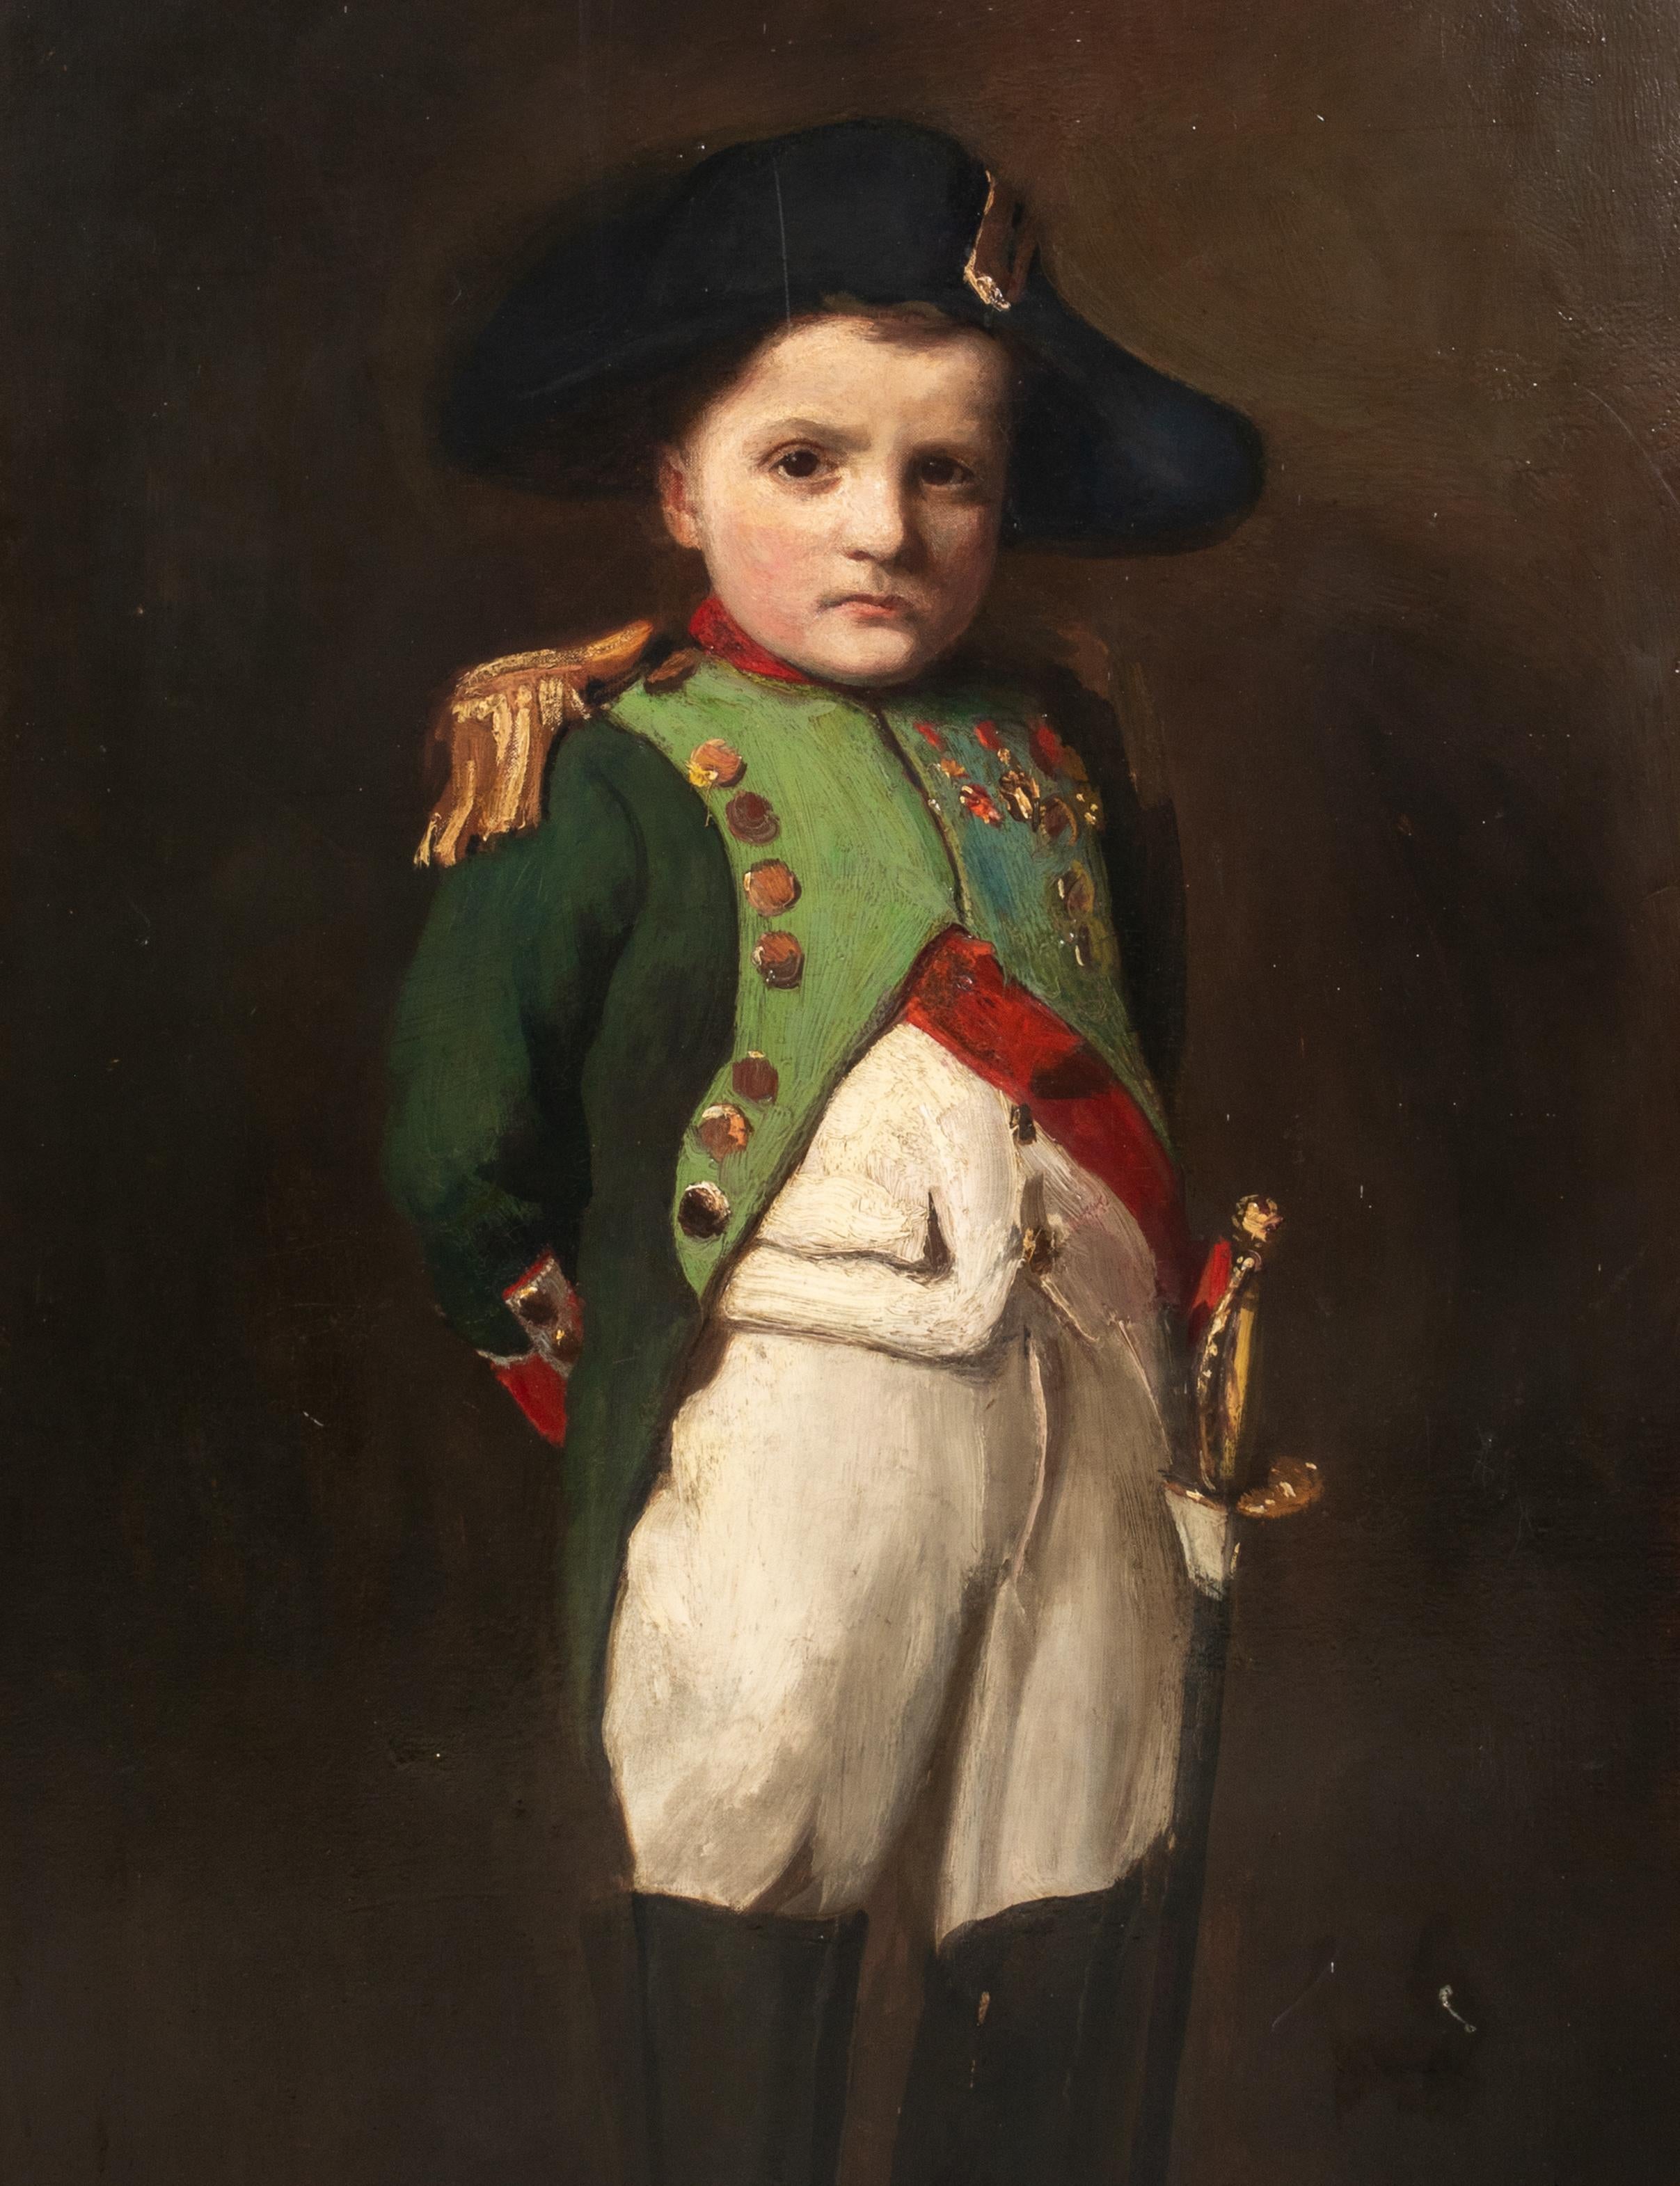 Portrait Of A Child As Napoleon Bonaparte, 17th Century 

FRANK THOMAS COPNALL (1870–1949) - one of a pair

Large 19th Century portrait of a Childe depicted as Napoleon Bonaparte, oil on canvas by Frank Thomas Copnall. Leading example of Copnall's